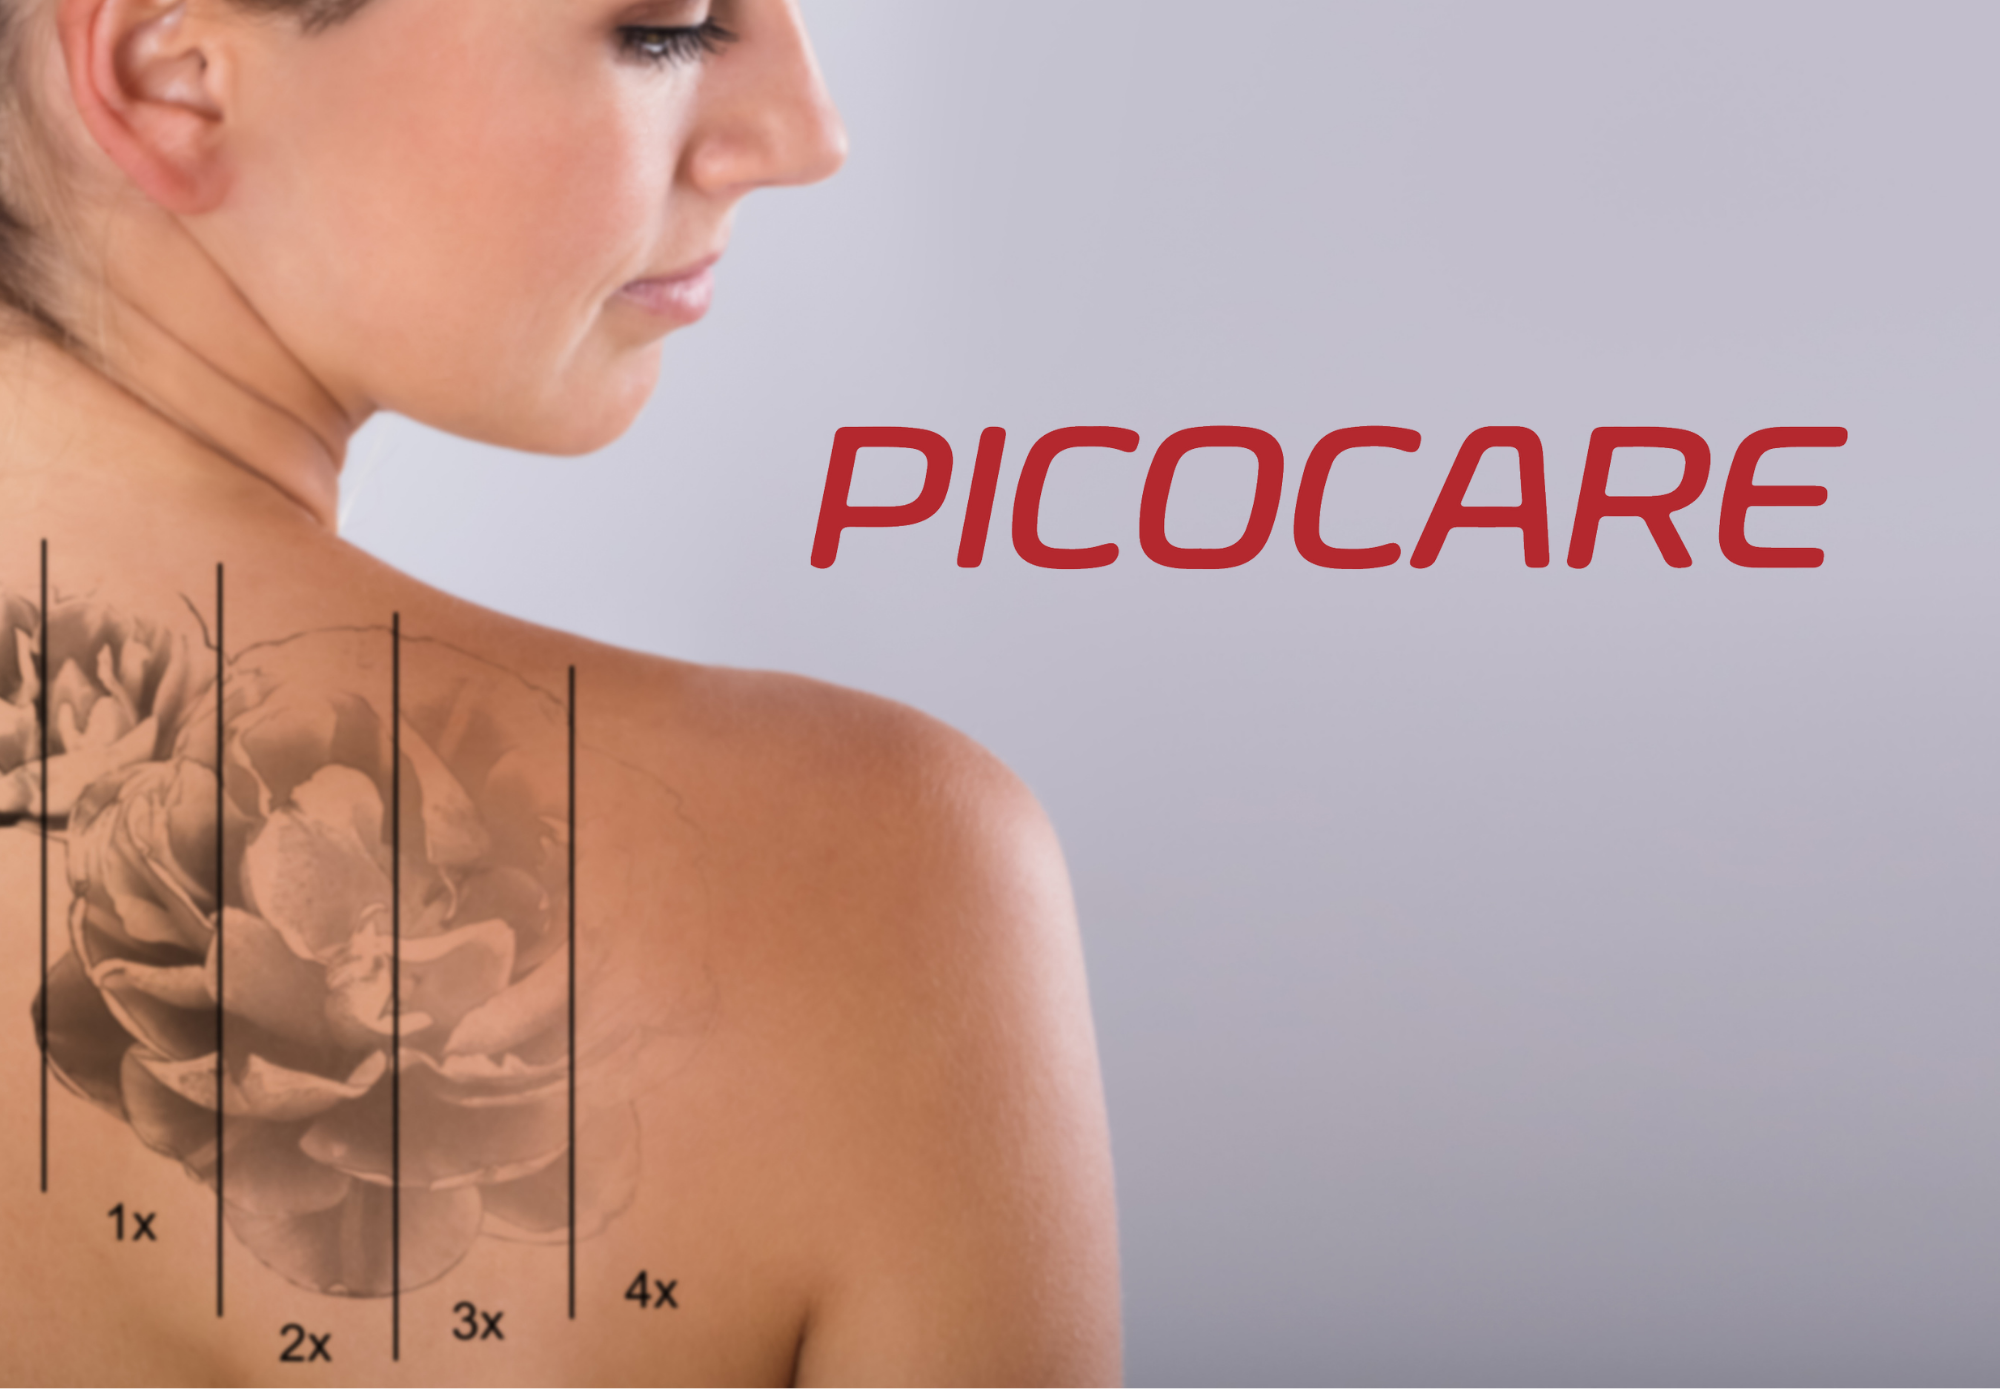 Tattoo removal with PicoCare Laser system.